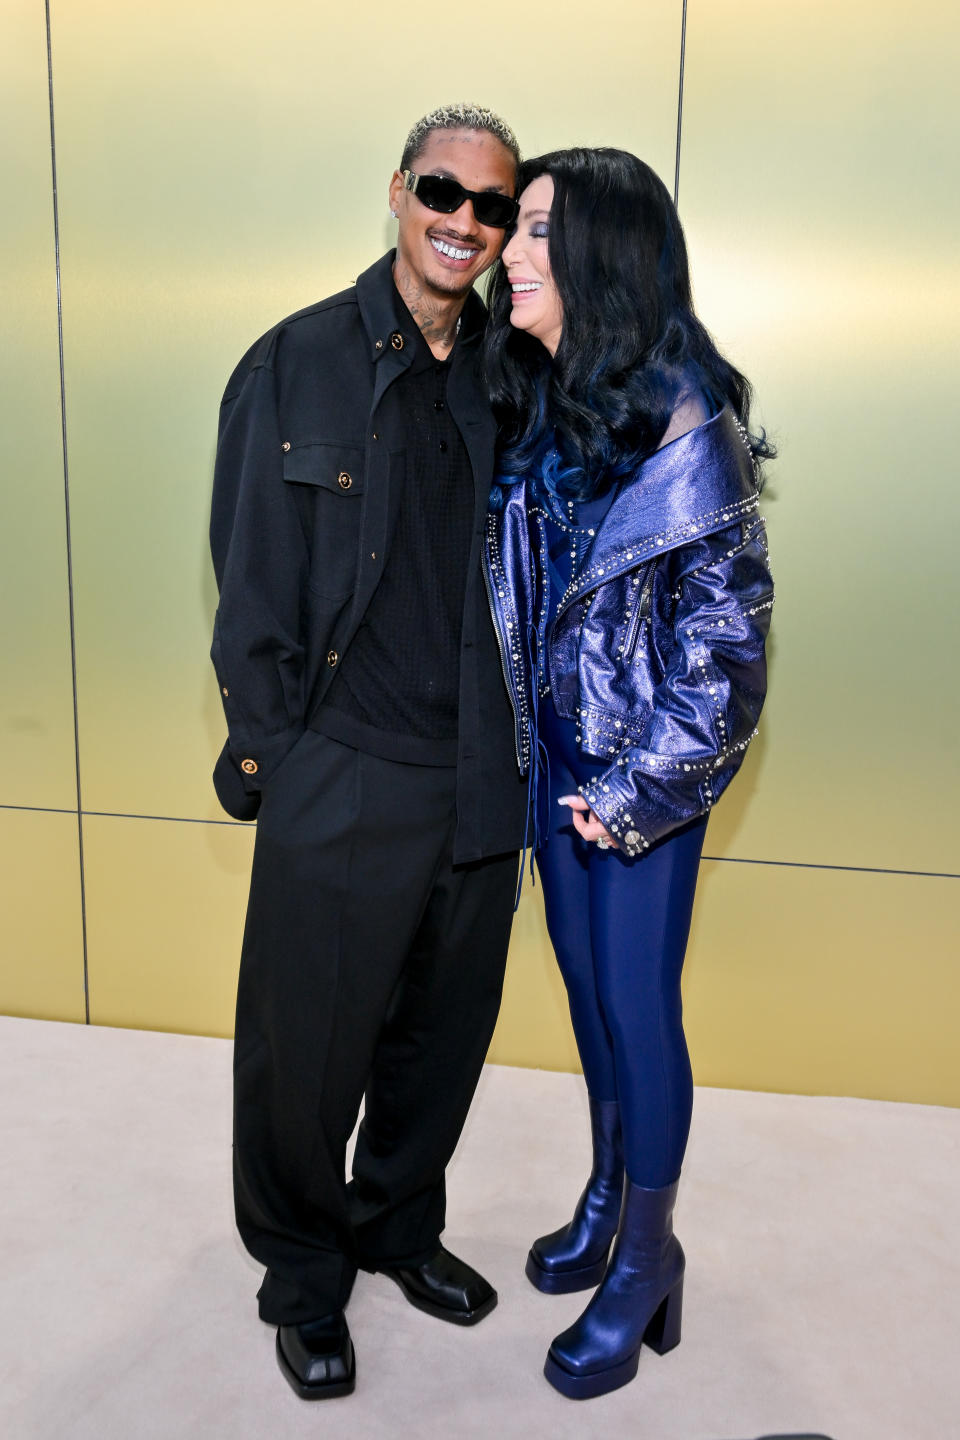 Alexander “A.E.” Edwards and Cher at the Versace Fall-Winter 2023 Fashion Show held at Pacific Design Center on March 9, 2023 in West Hollywood, California.